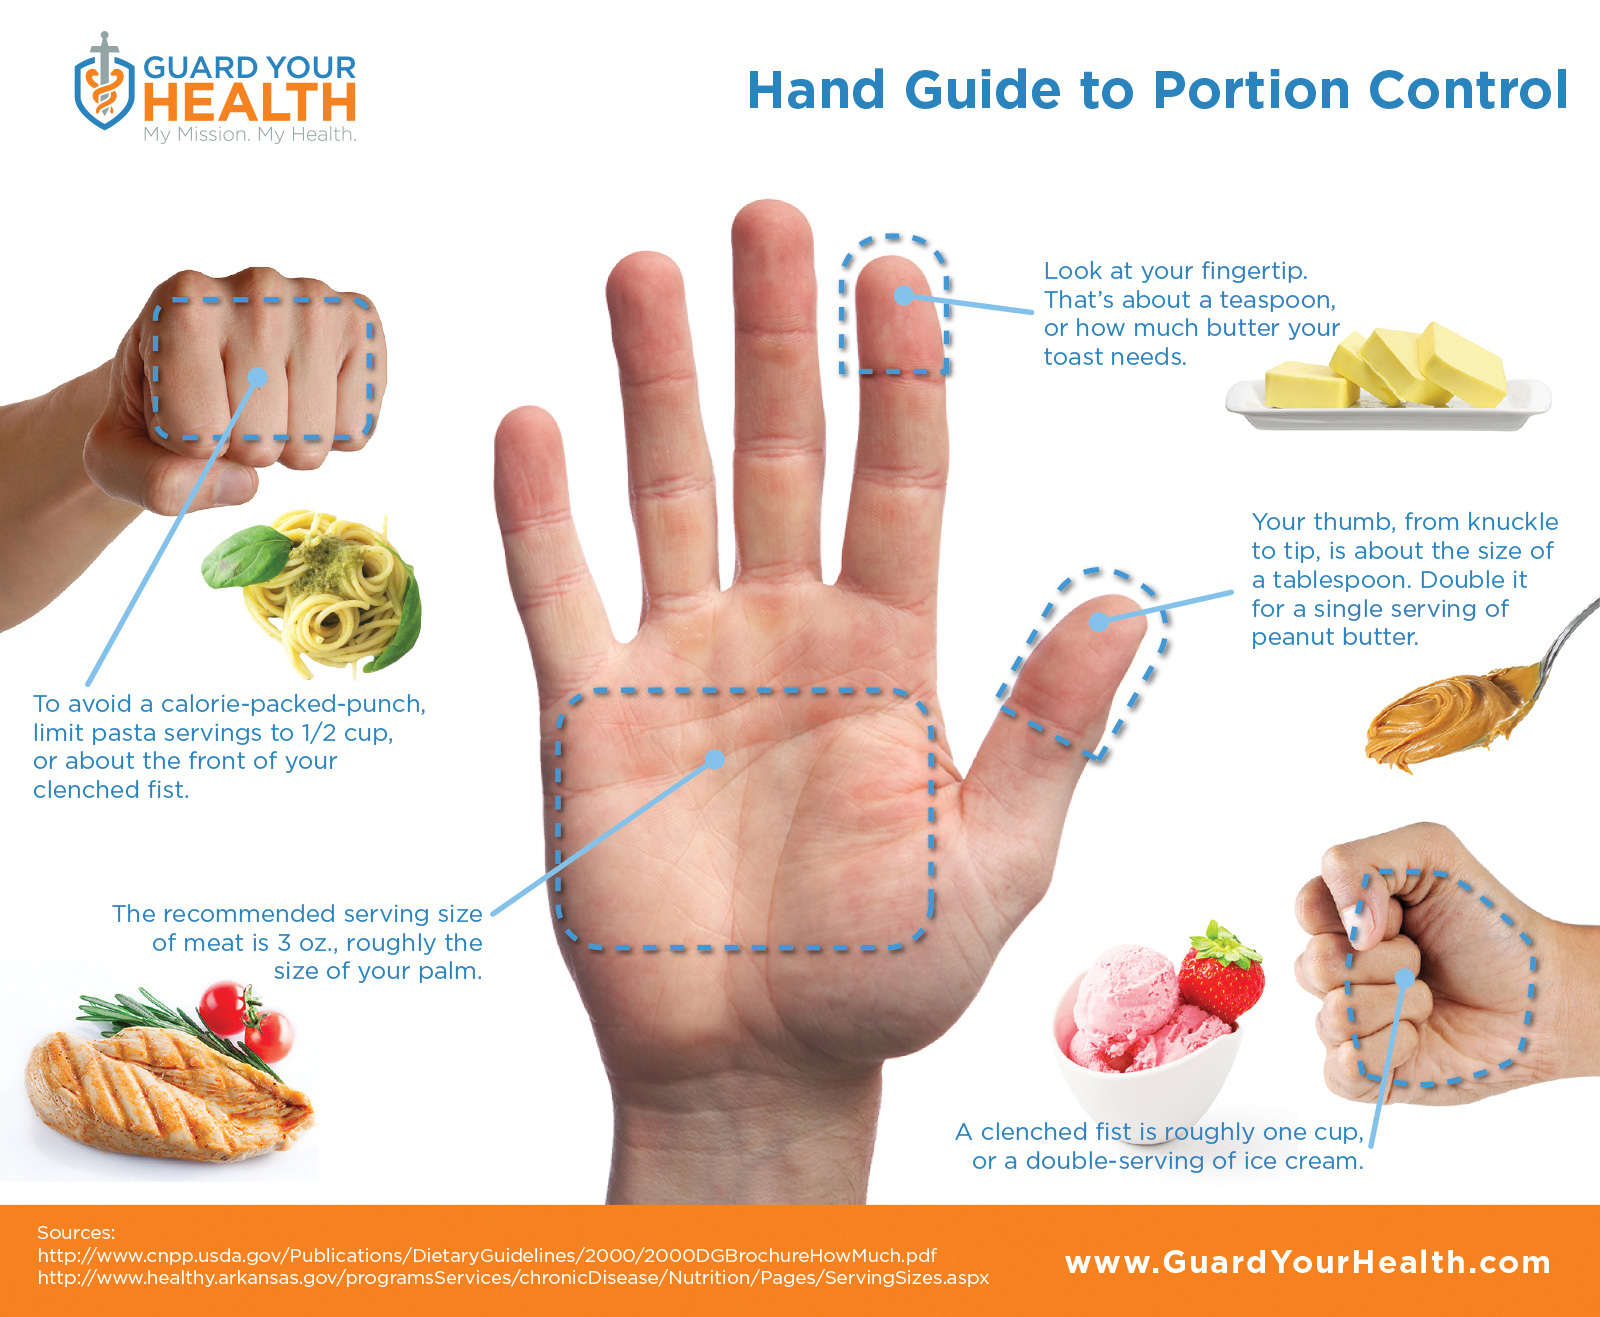 Your hand can be a useful tool for estimating portion sizes. the front of a clenched fist is about 1/2 cup; the size of the palm of your hand is about 3 oz. which is a recommended serving of meat; a fingertip is about a teaspoon useful for condiments like butter; your thumb is about a tablespoon, useful for nut butters; your clenched fist is about 1 cup